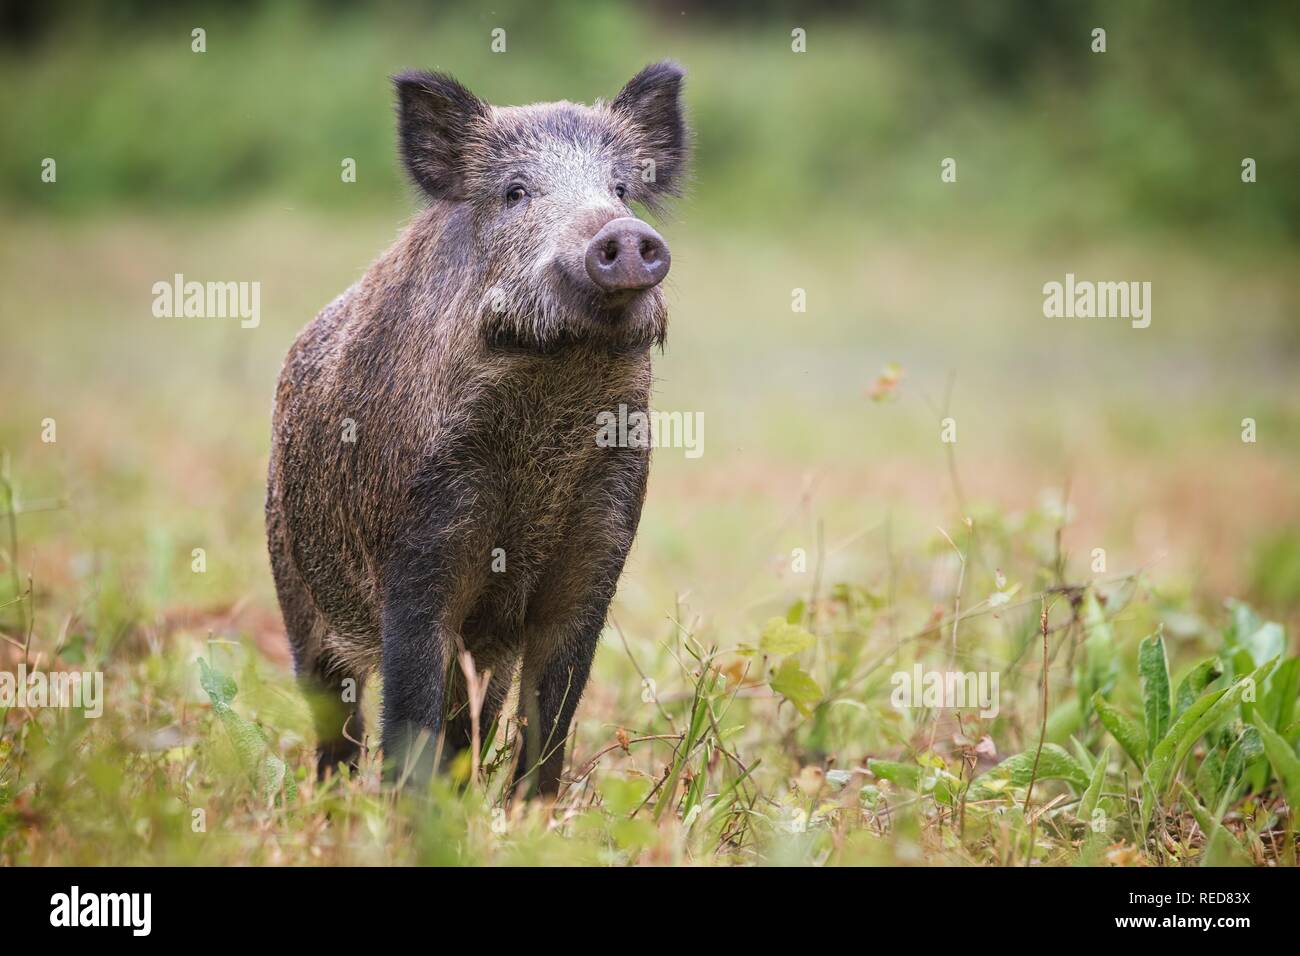 Curious wild boar, sus scrofa, sniffing for danger on hayfield in daylight. Stock Photo